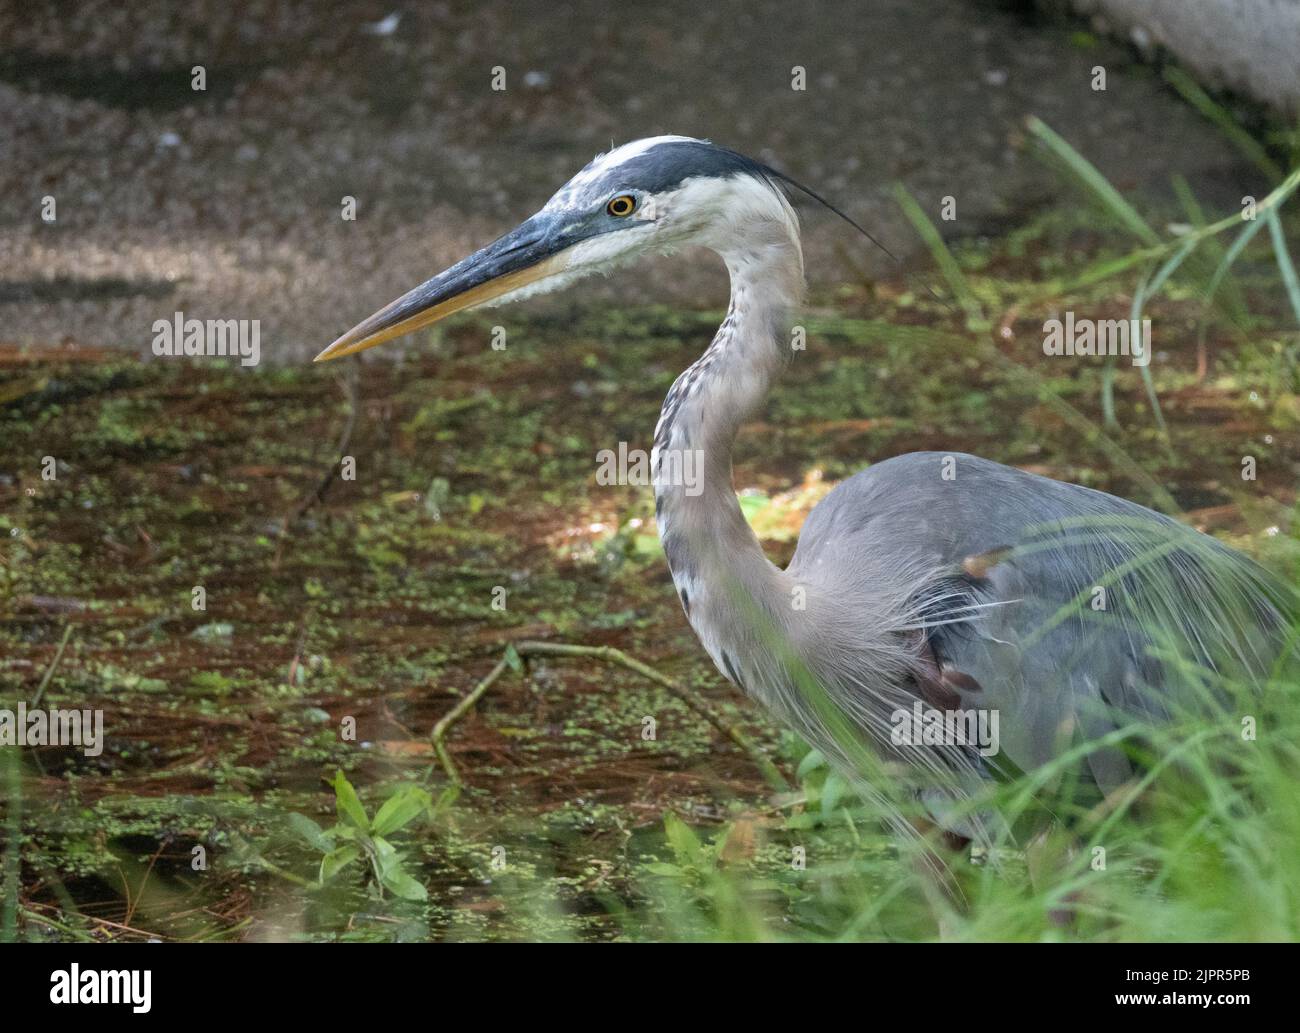 Close up of a Great Blue Heron facing left, standing along a shoreline while hunting for prey. Photographed with a shallow depth of field. Stock Photo